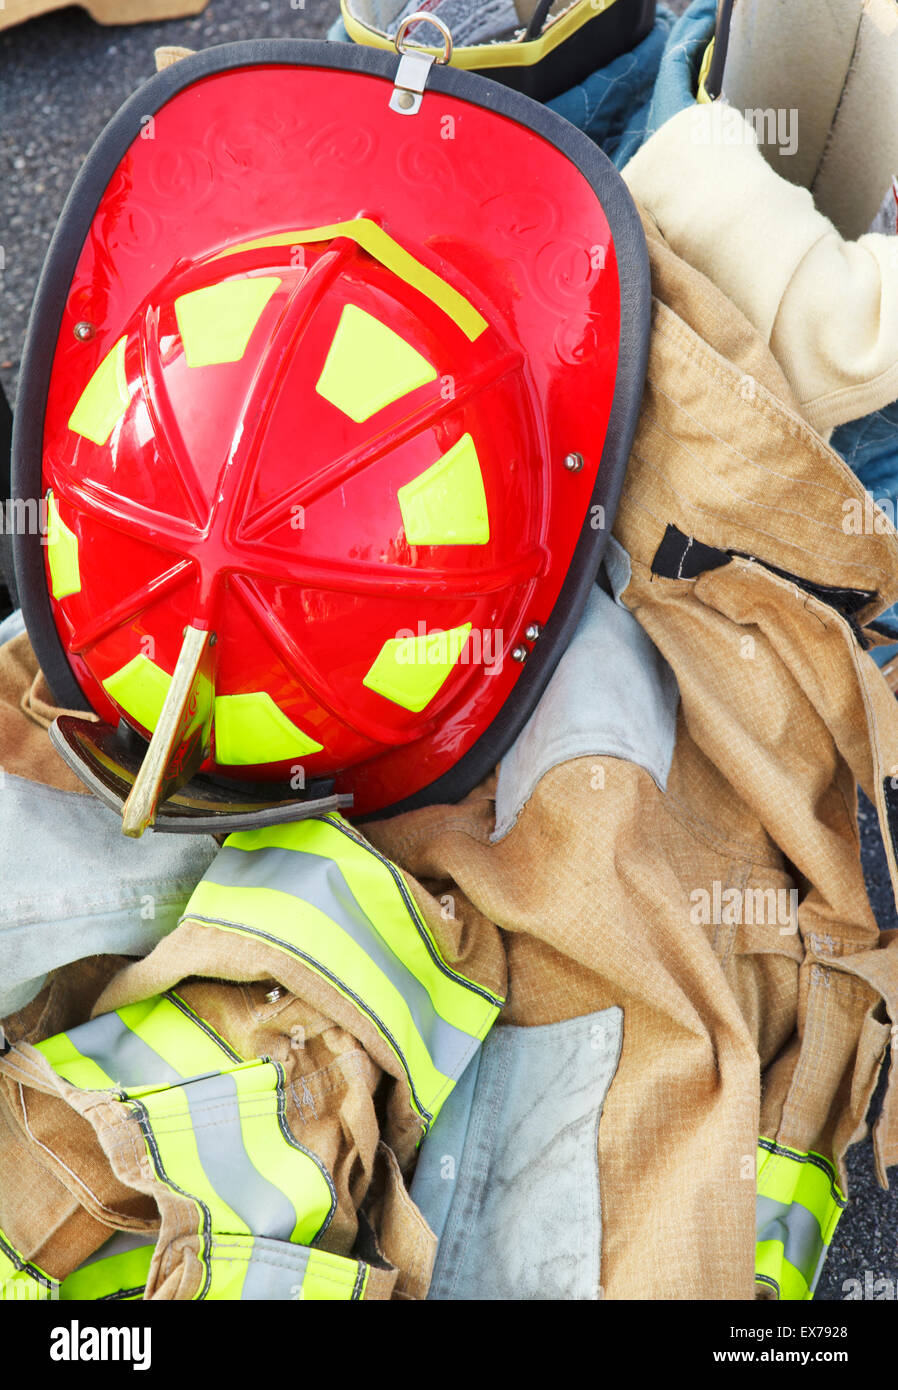 Firefighter Safety Gear Stock Photo